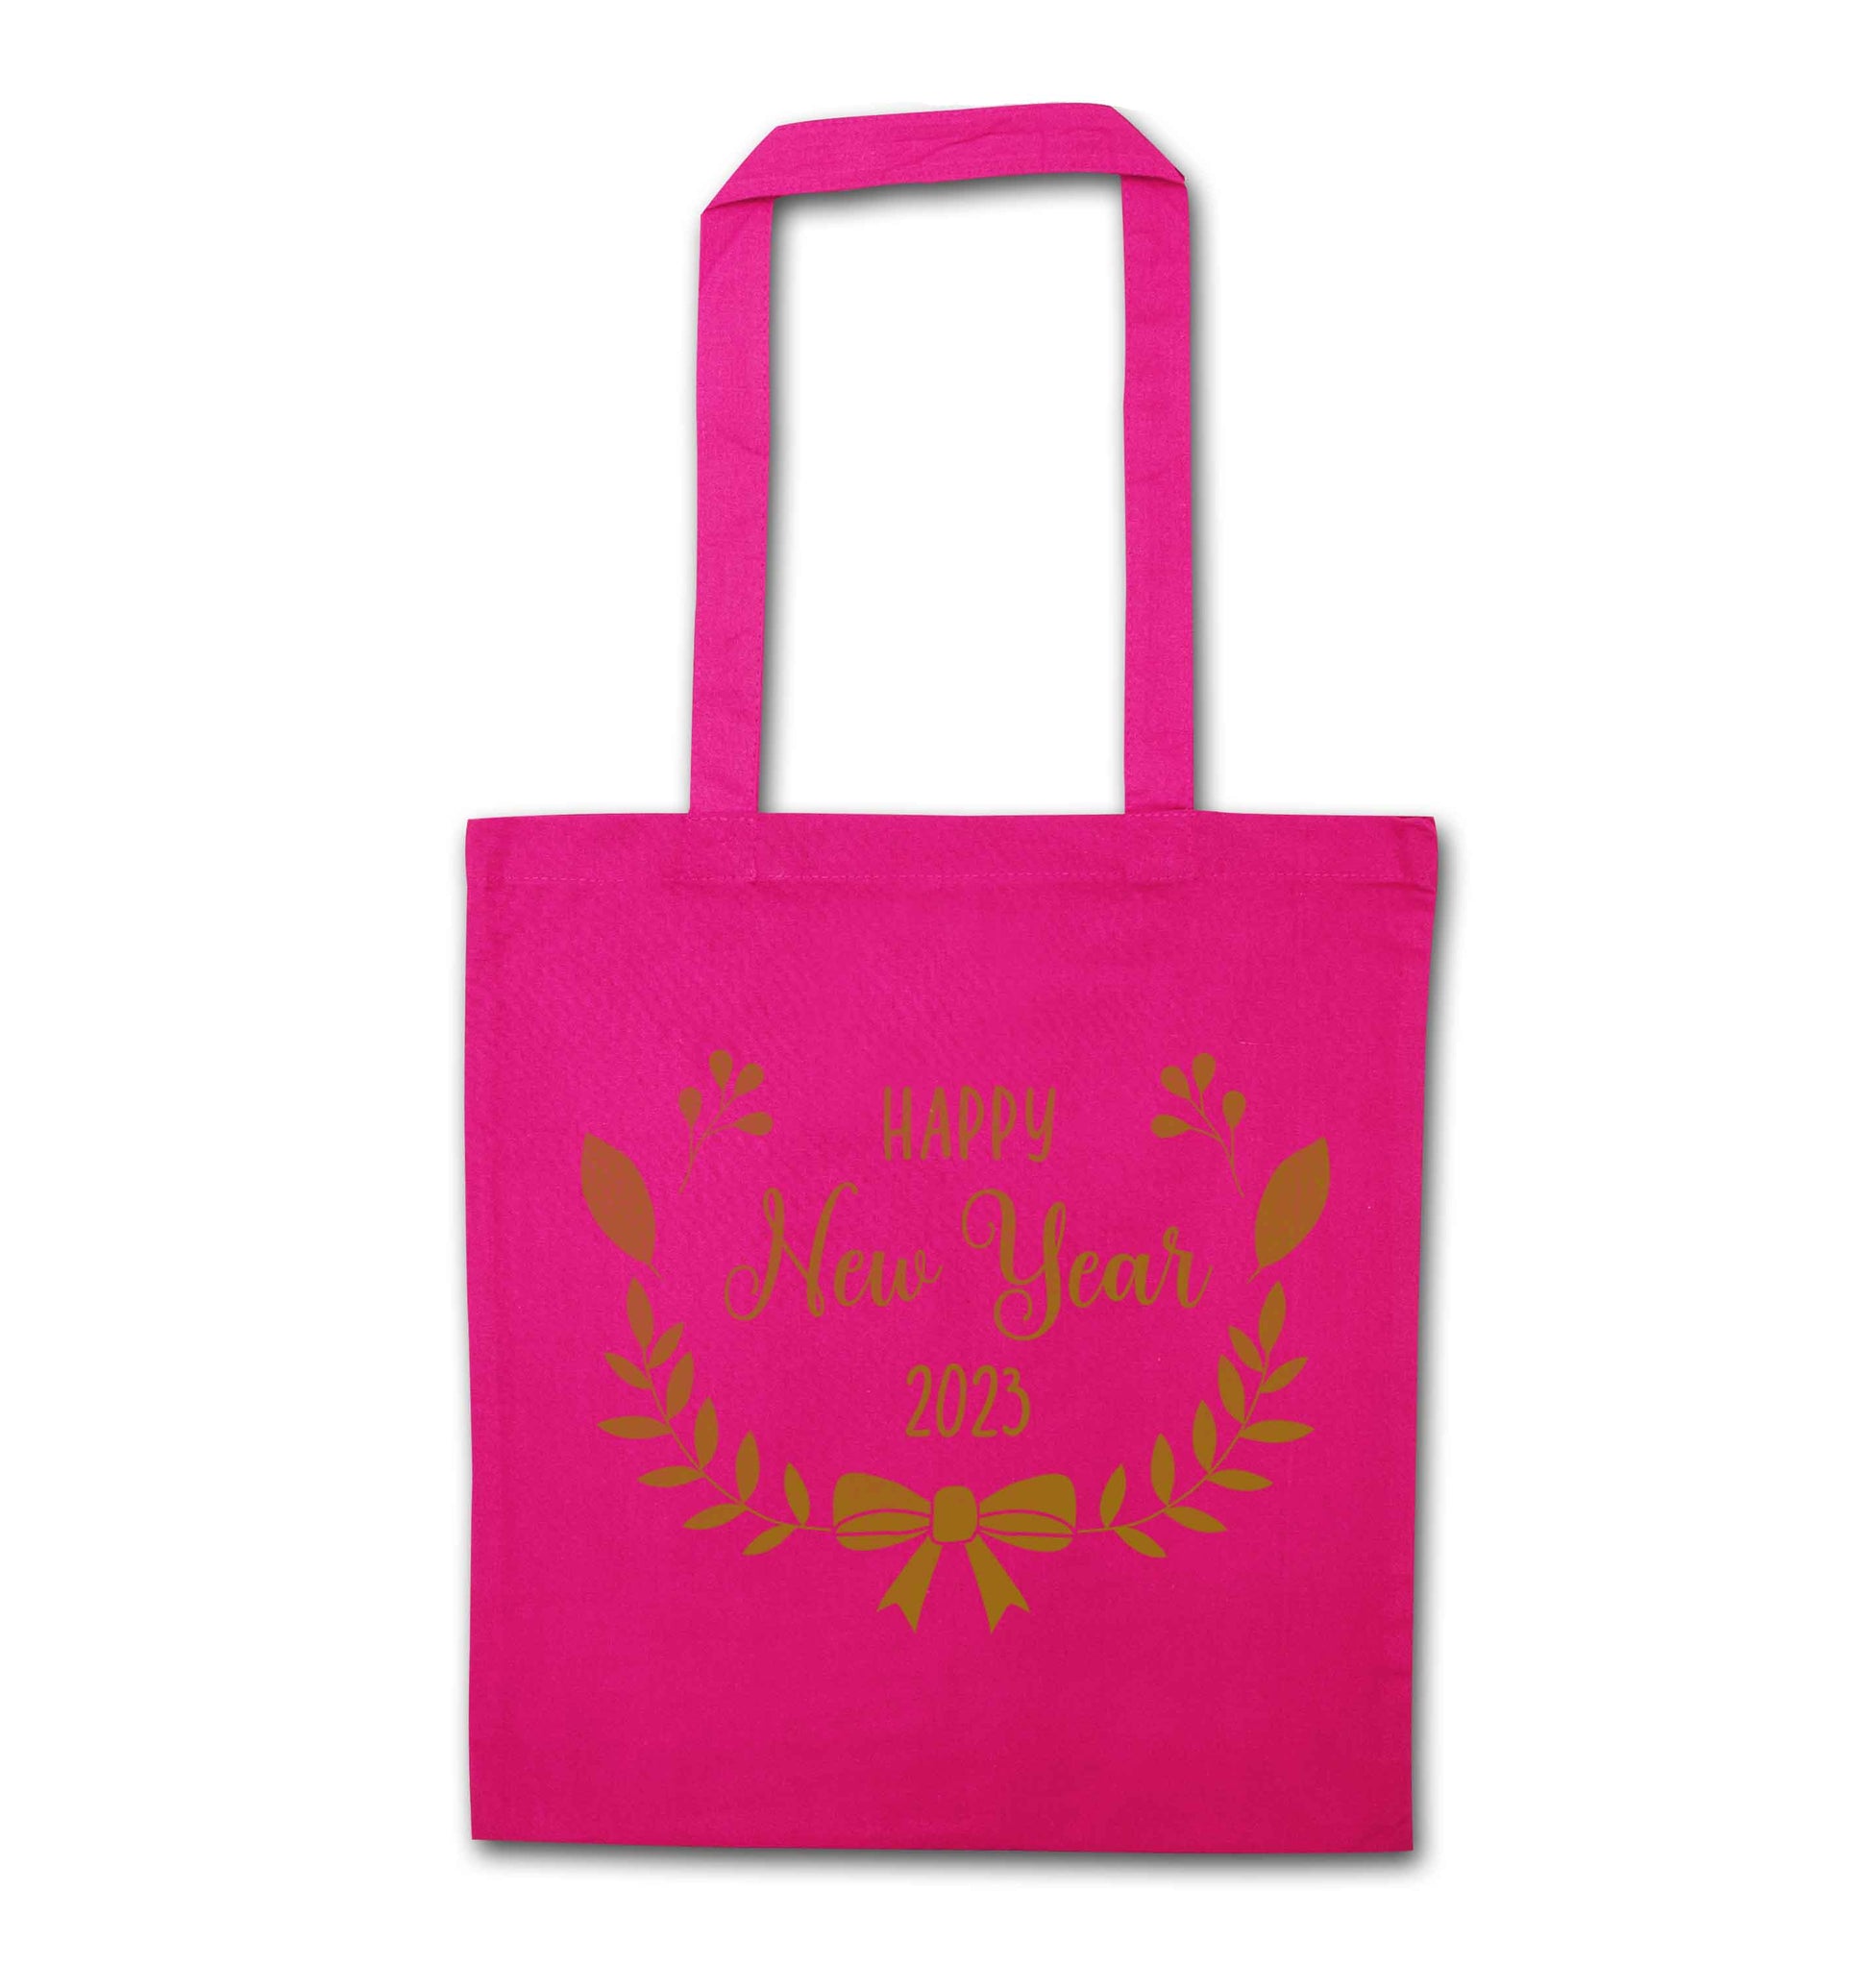 Happy New Year 2023 pink tote bag